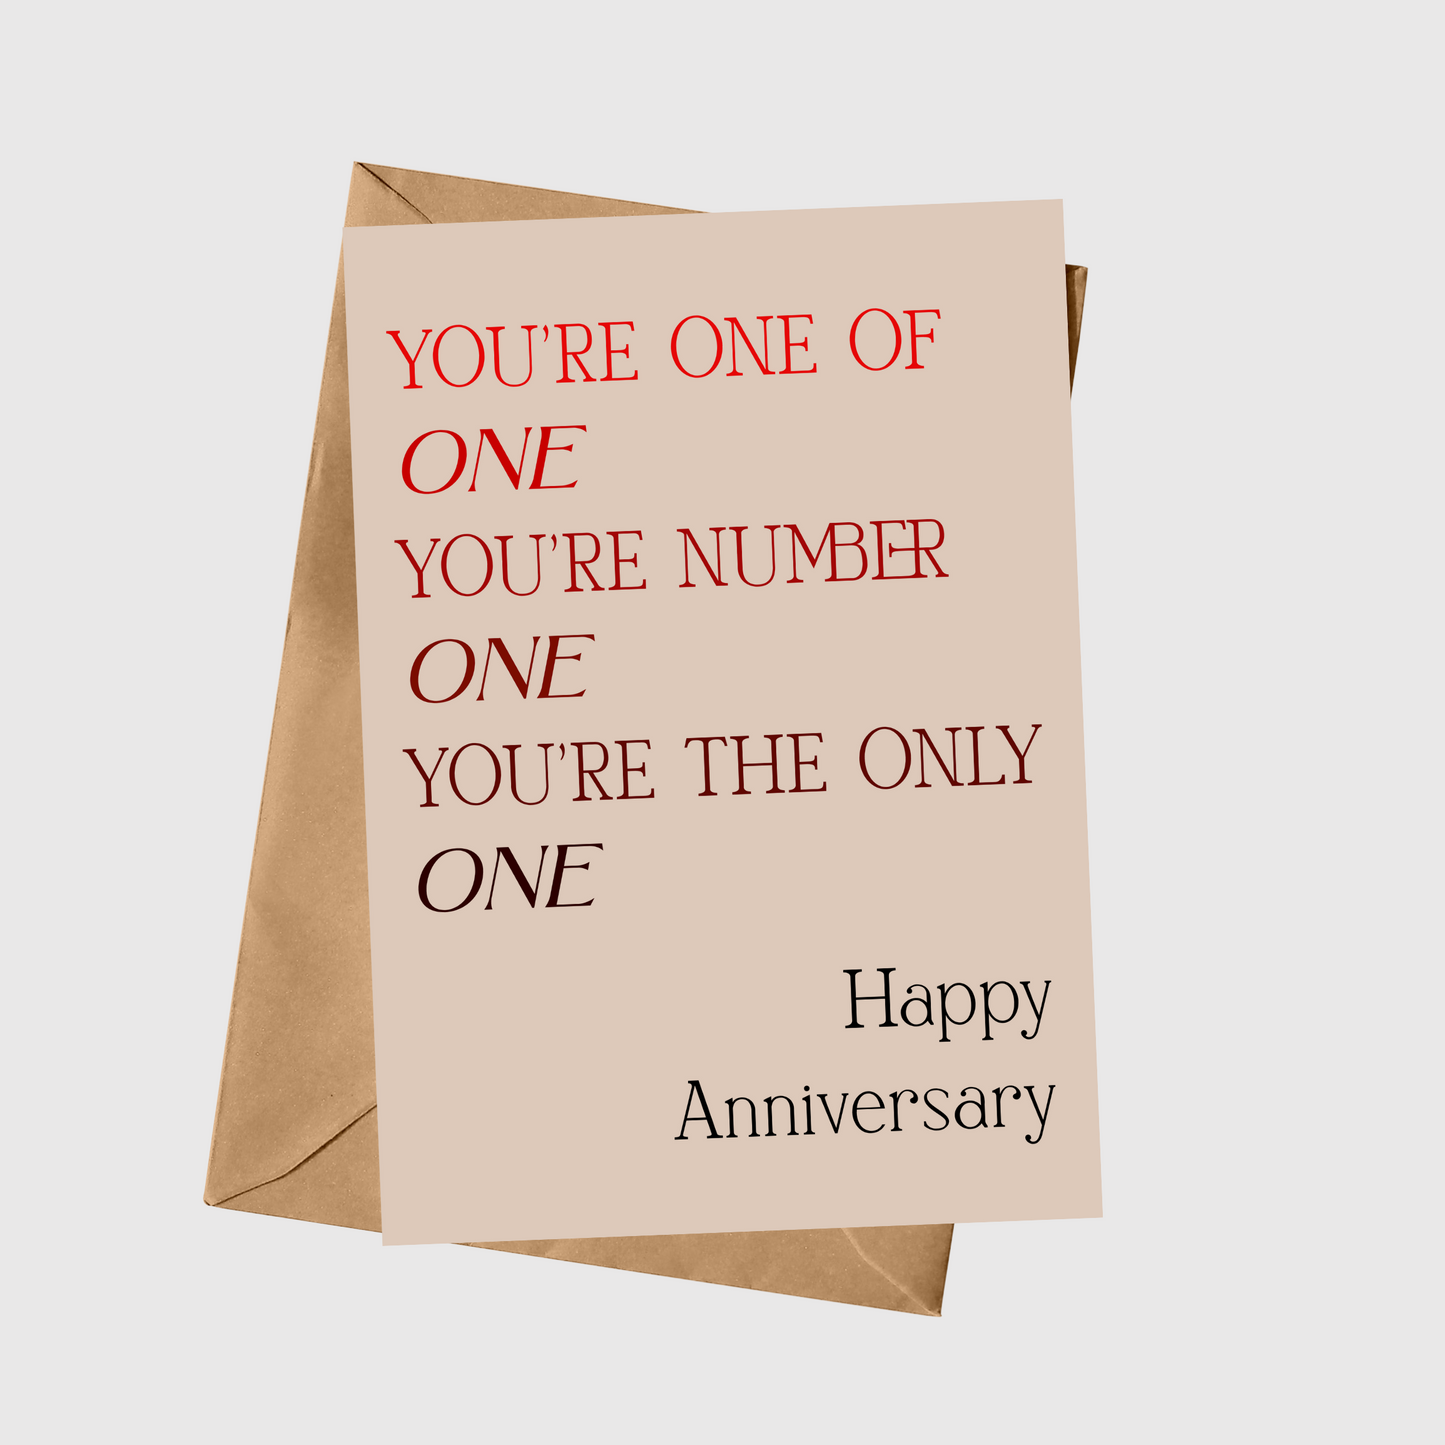 You're One of One, You're Number One, You're The Only One - Happy Anniversary